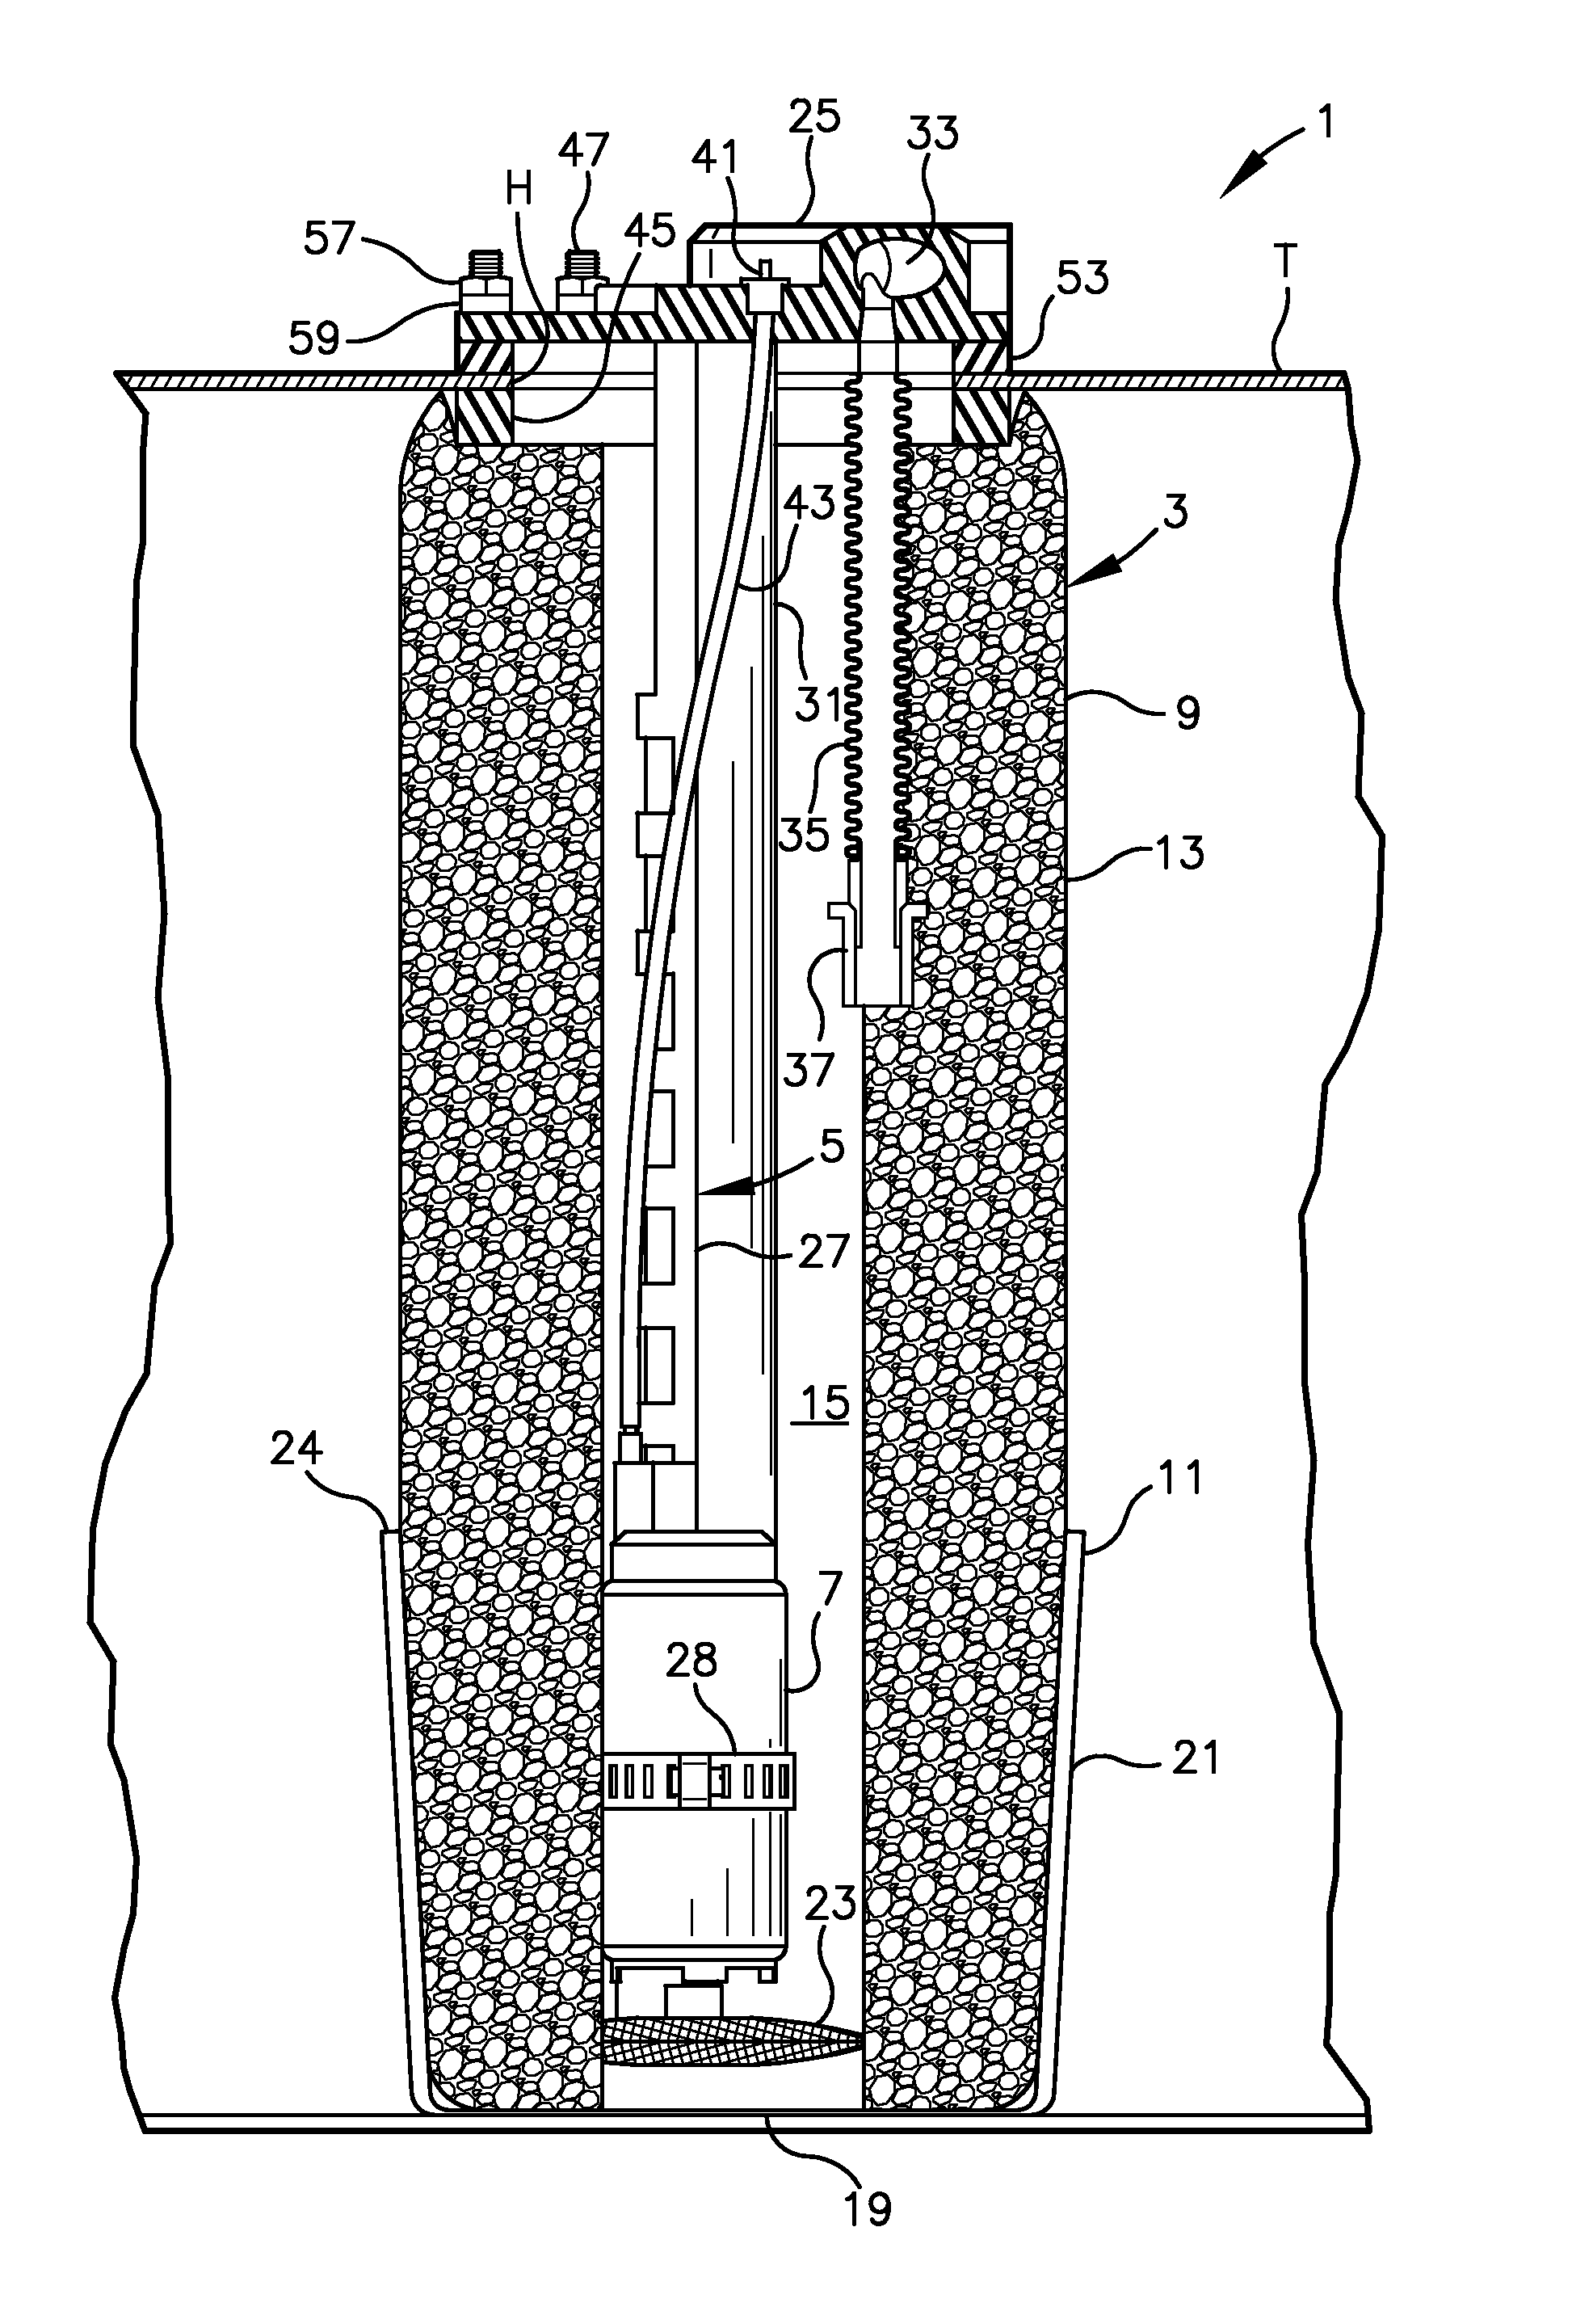 Apparatus and method for modifying a fuel tank to accept an in-tank fuel pump